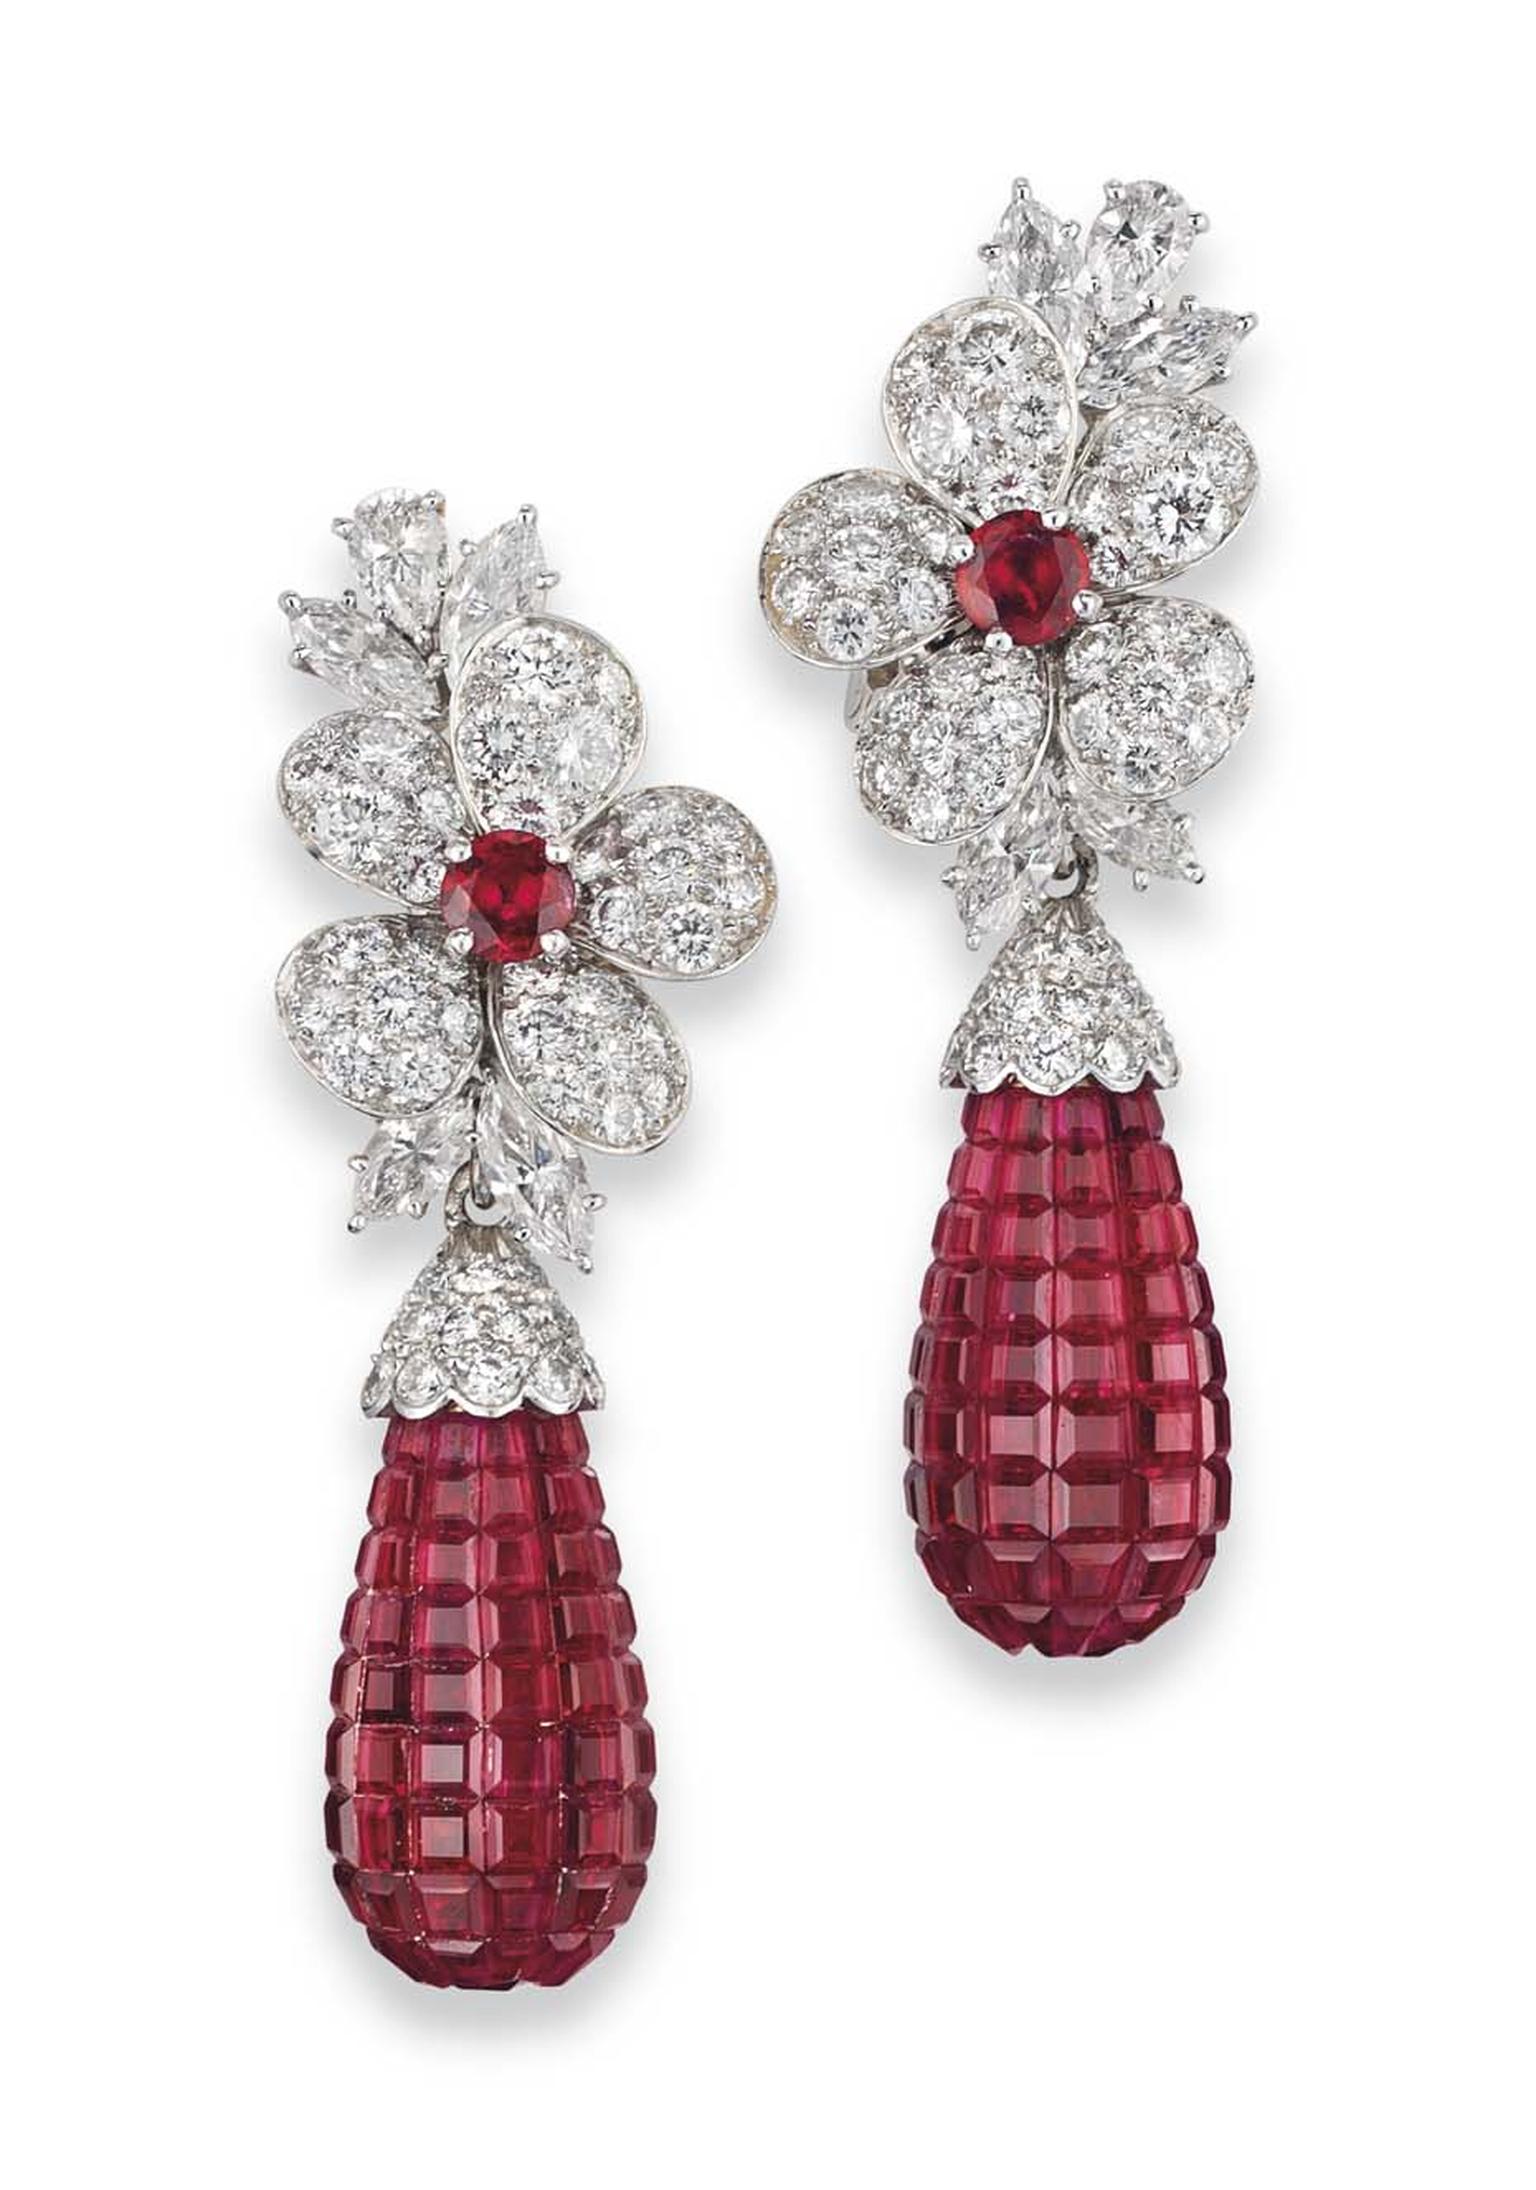 Christie's Important Jewels Sale also saw the sale of a pair of ruby and diamond earrings by Van Cleef & Arpels circa 1990, which sold for more than double their estimate, fetching £242,500 (estimate: £80,000-100,000).